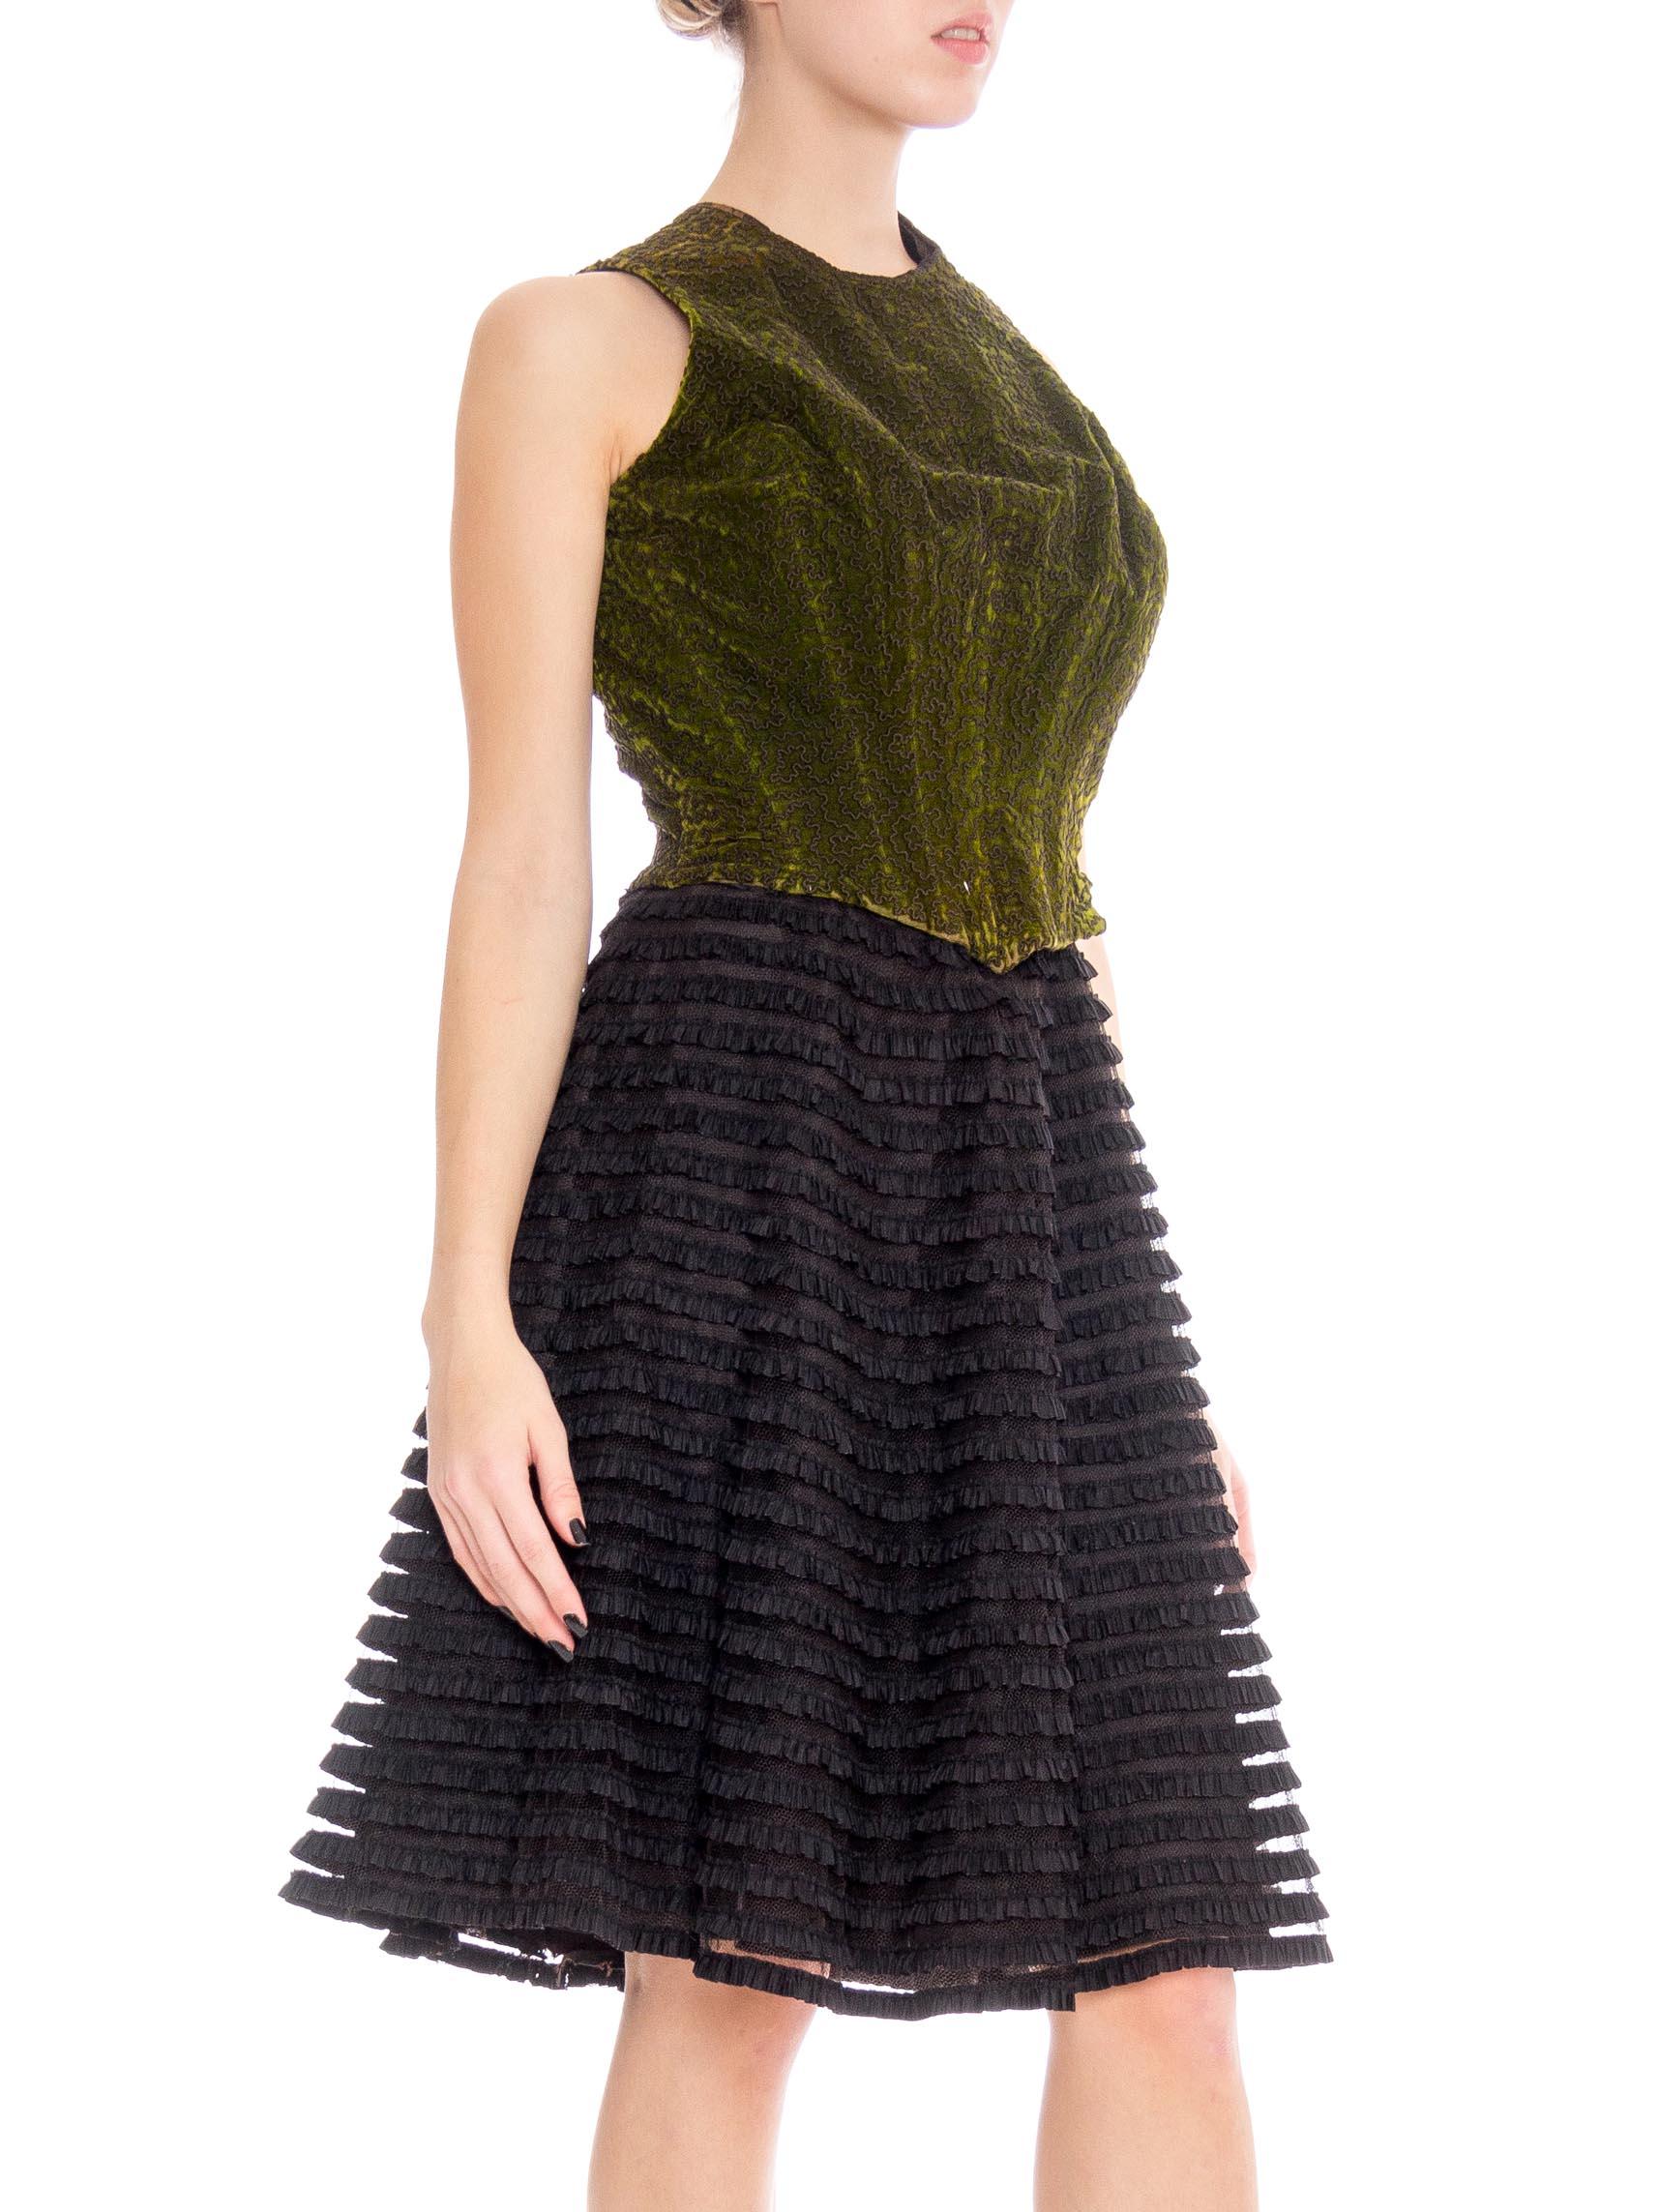 MORPHEW COLLECTION Black & Green Silk Cotton Velvet Dress With Ruffled Tulle Sk In Excellent Condition In New York, NY